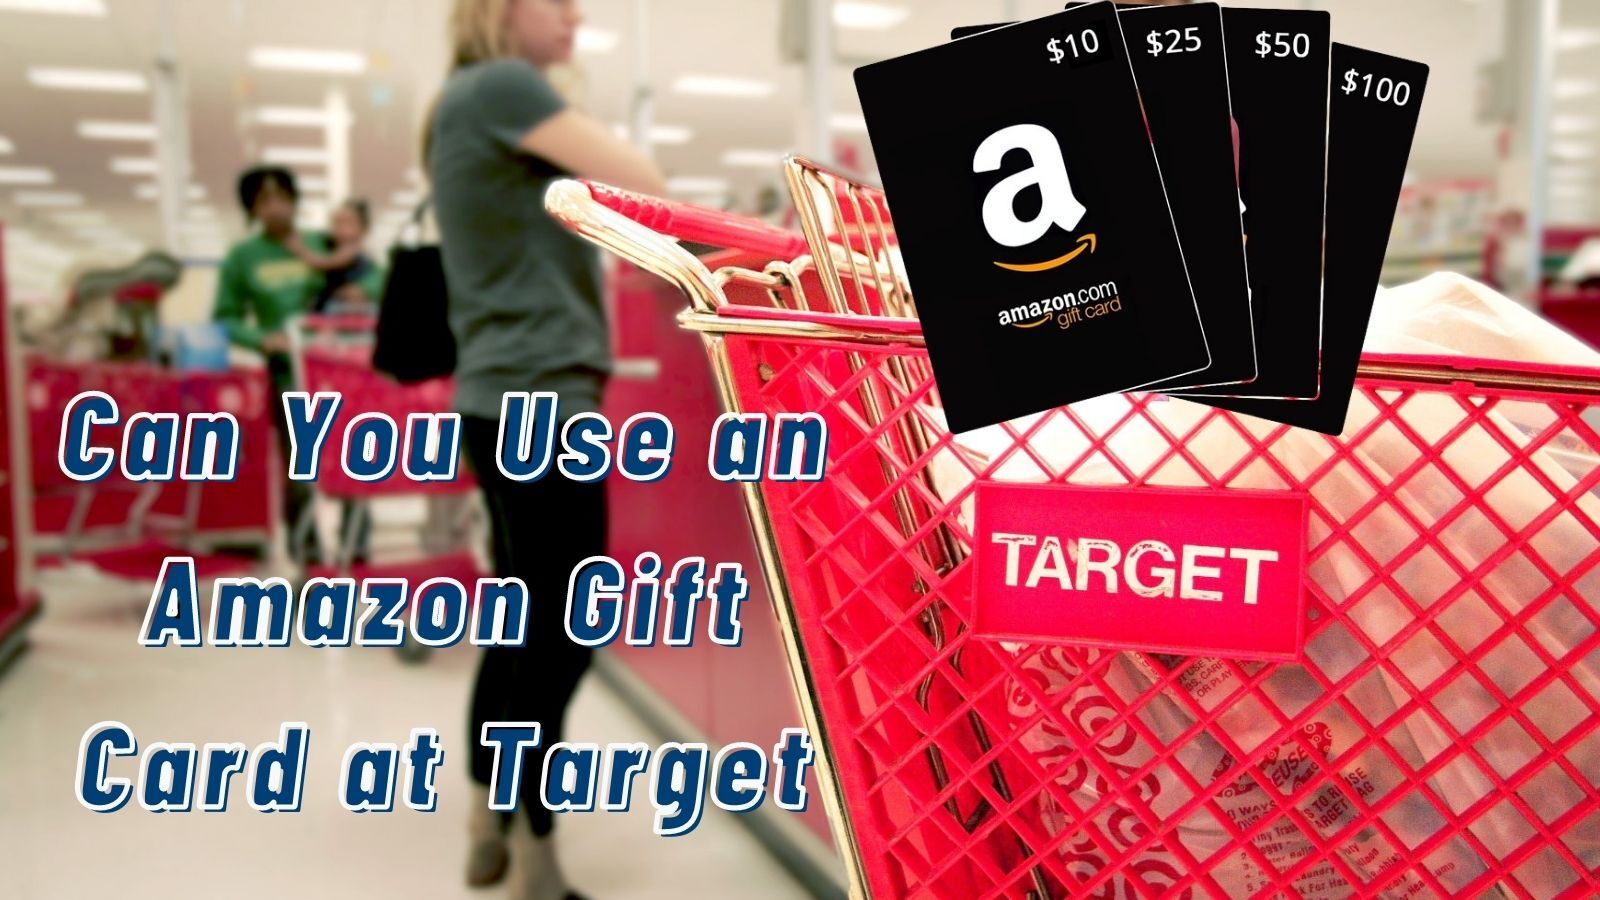 Can You Use Amazon Gift Cards At Target? (All You Need to Know)